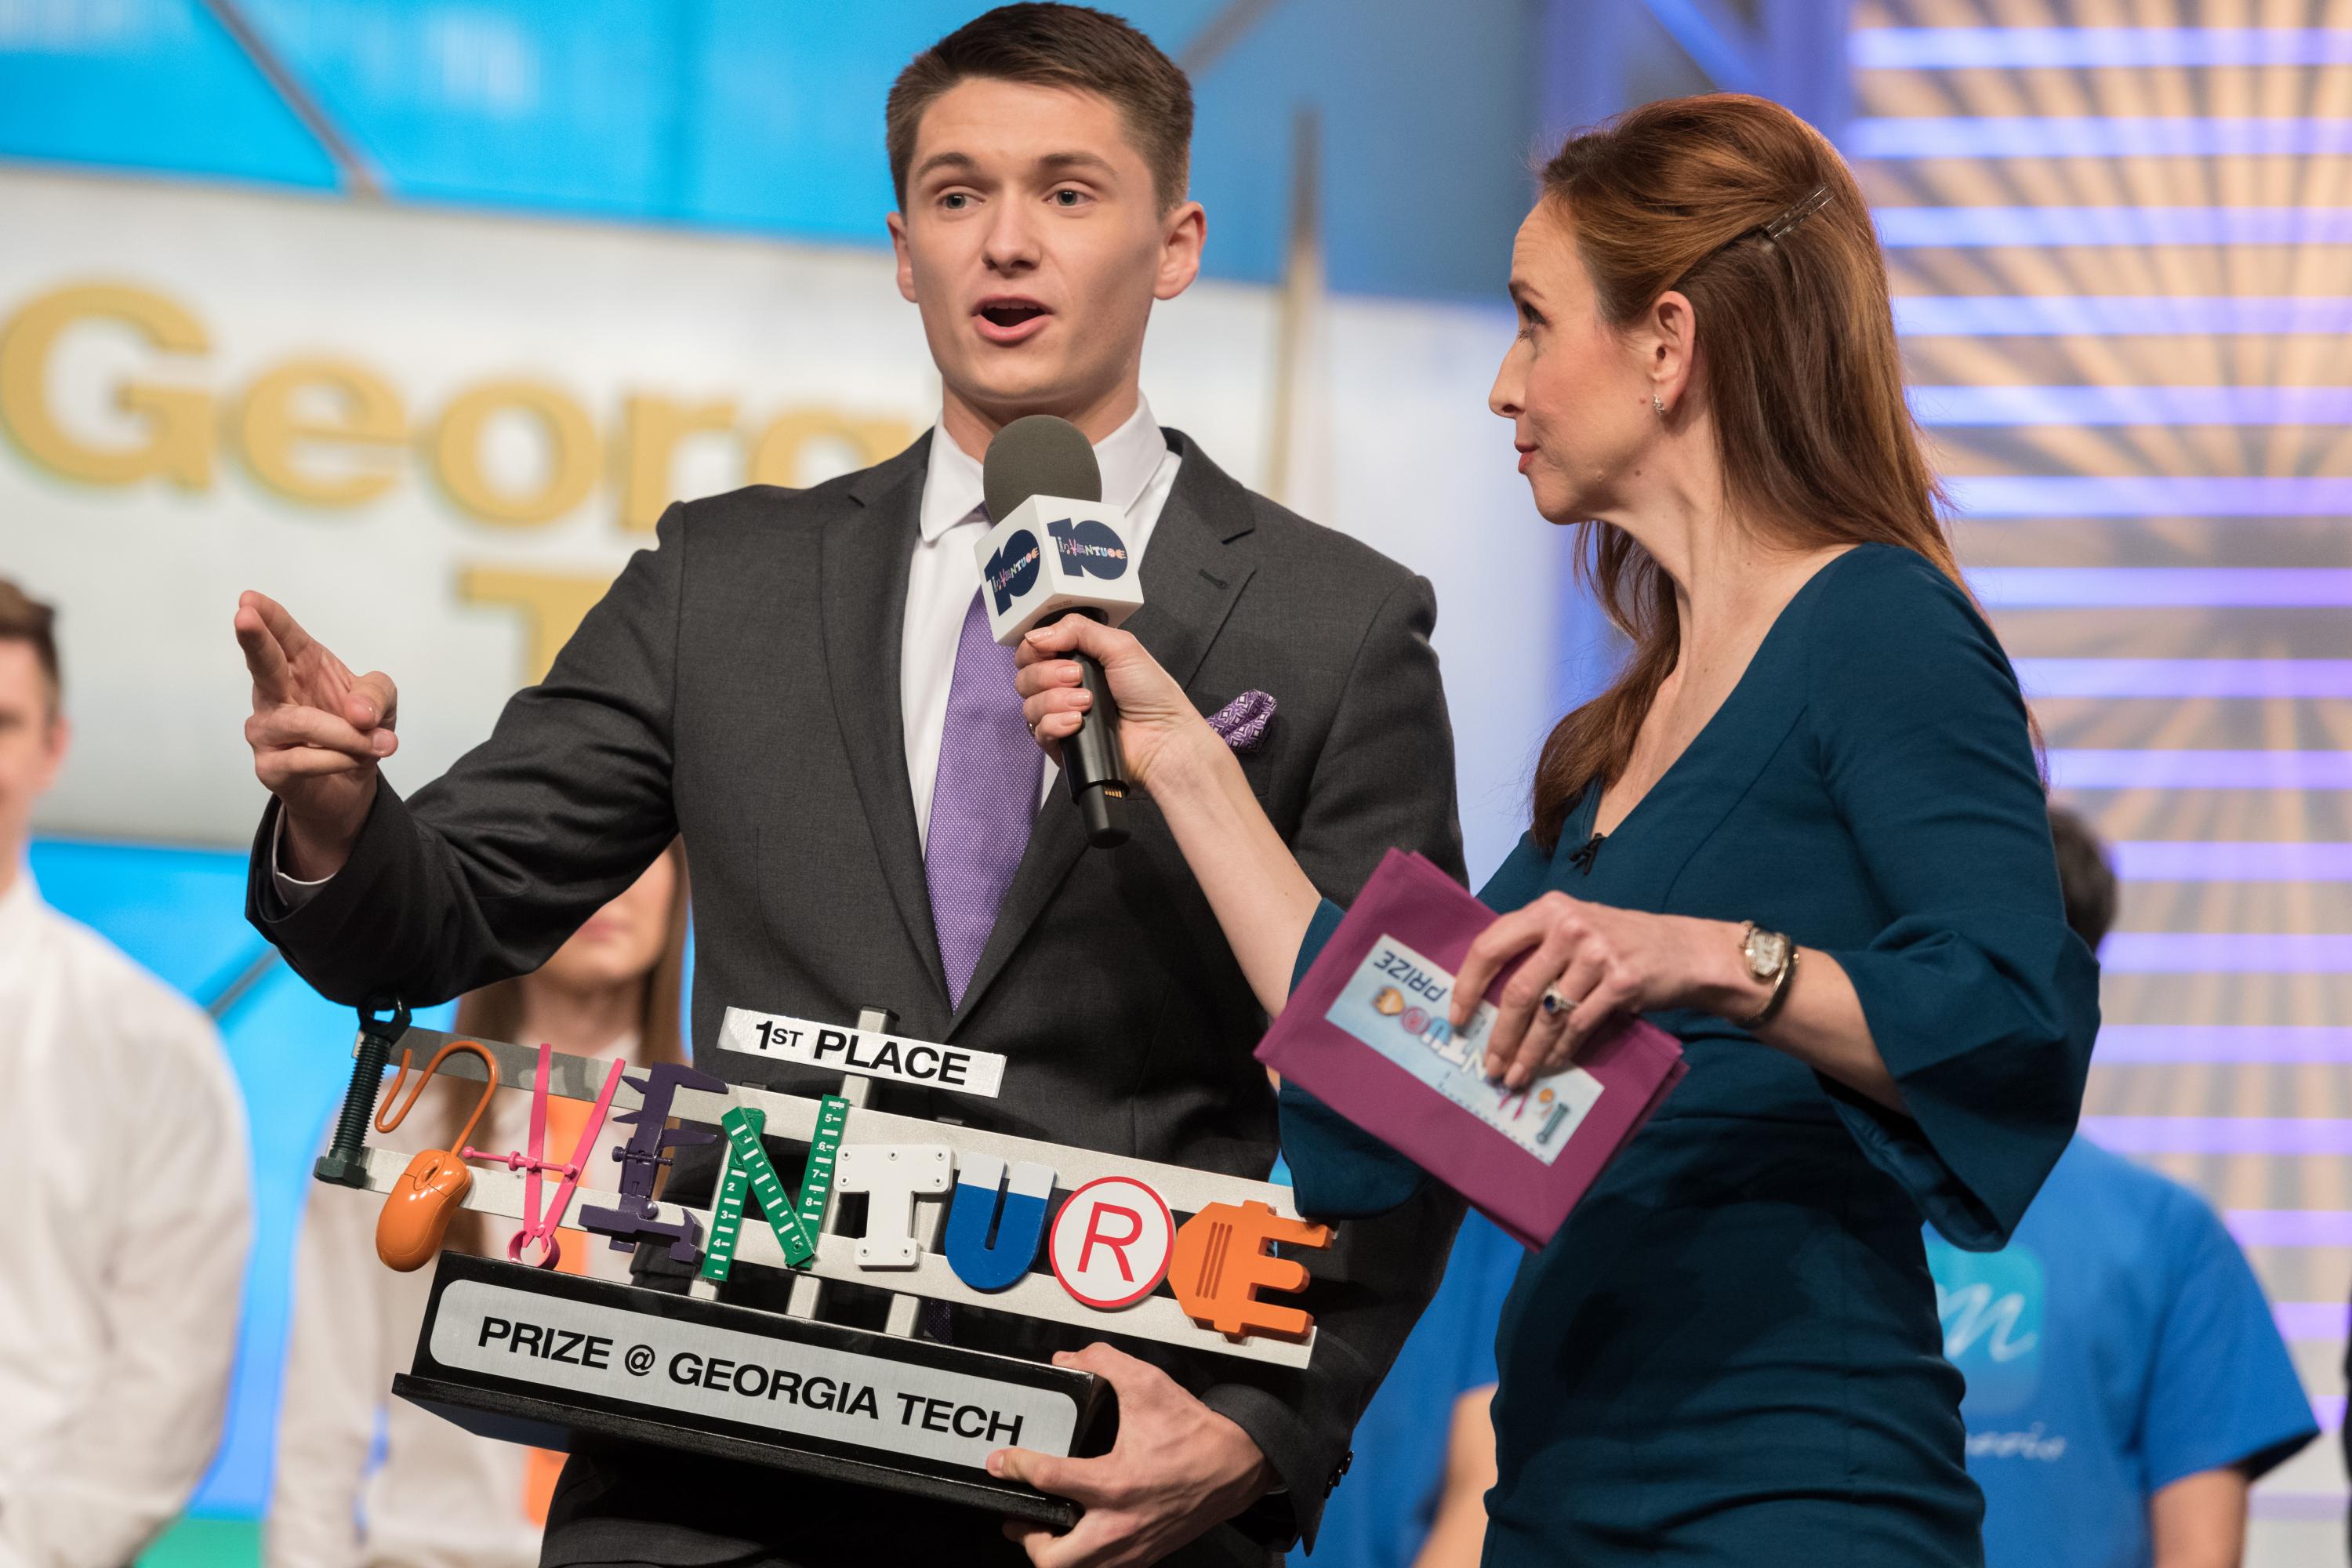 Kolby Hanley won Georgia Tech’s 2018 InVenture Prize for his invention, a first of its kind aiming device for competitive archery. Hanley talks with host Faith Salie. (Photo by Allison Carter)